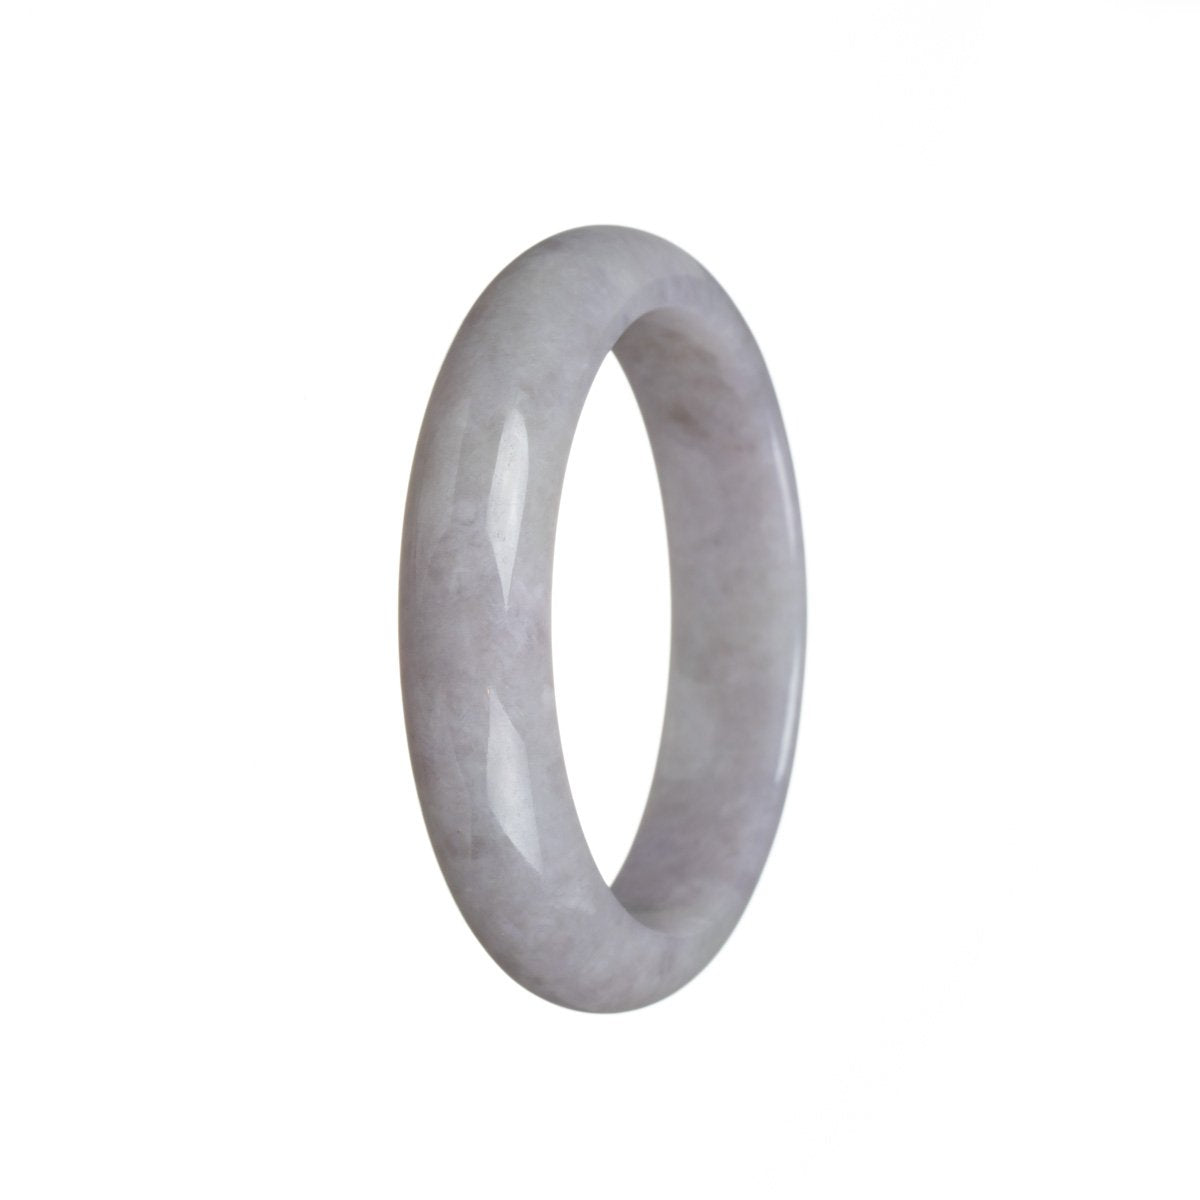 A lavender traditional jade bangle with a semi-round shape, measuring 55mm. Certified Type A quality. By MAYS™.